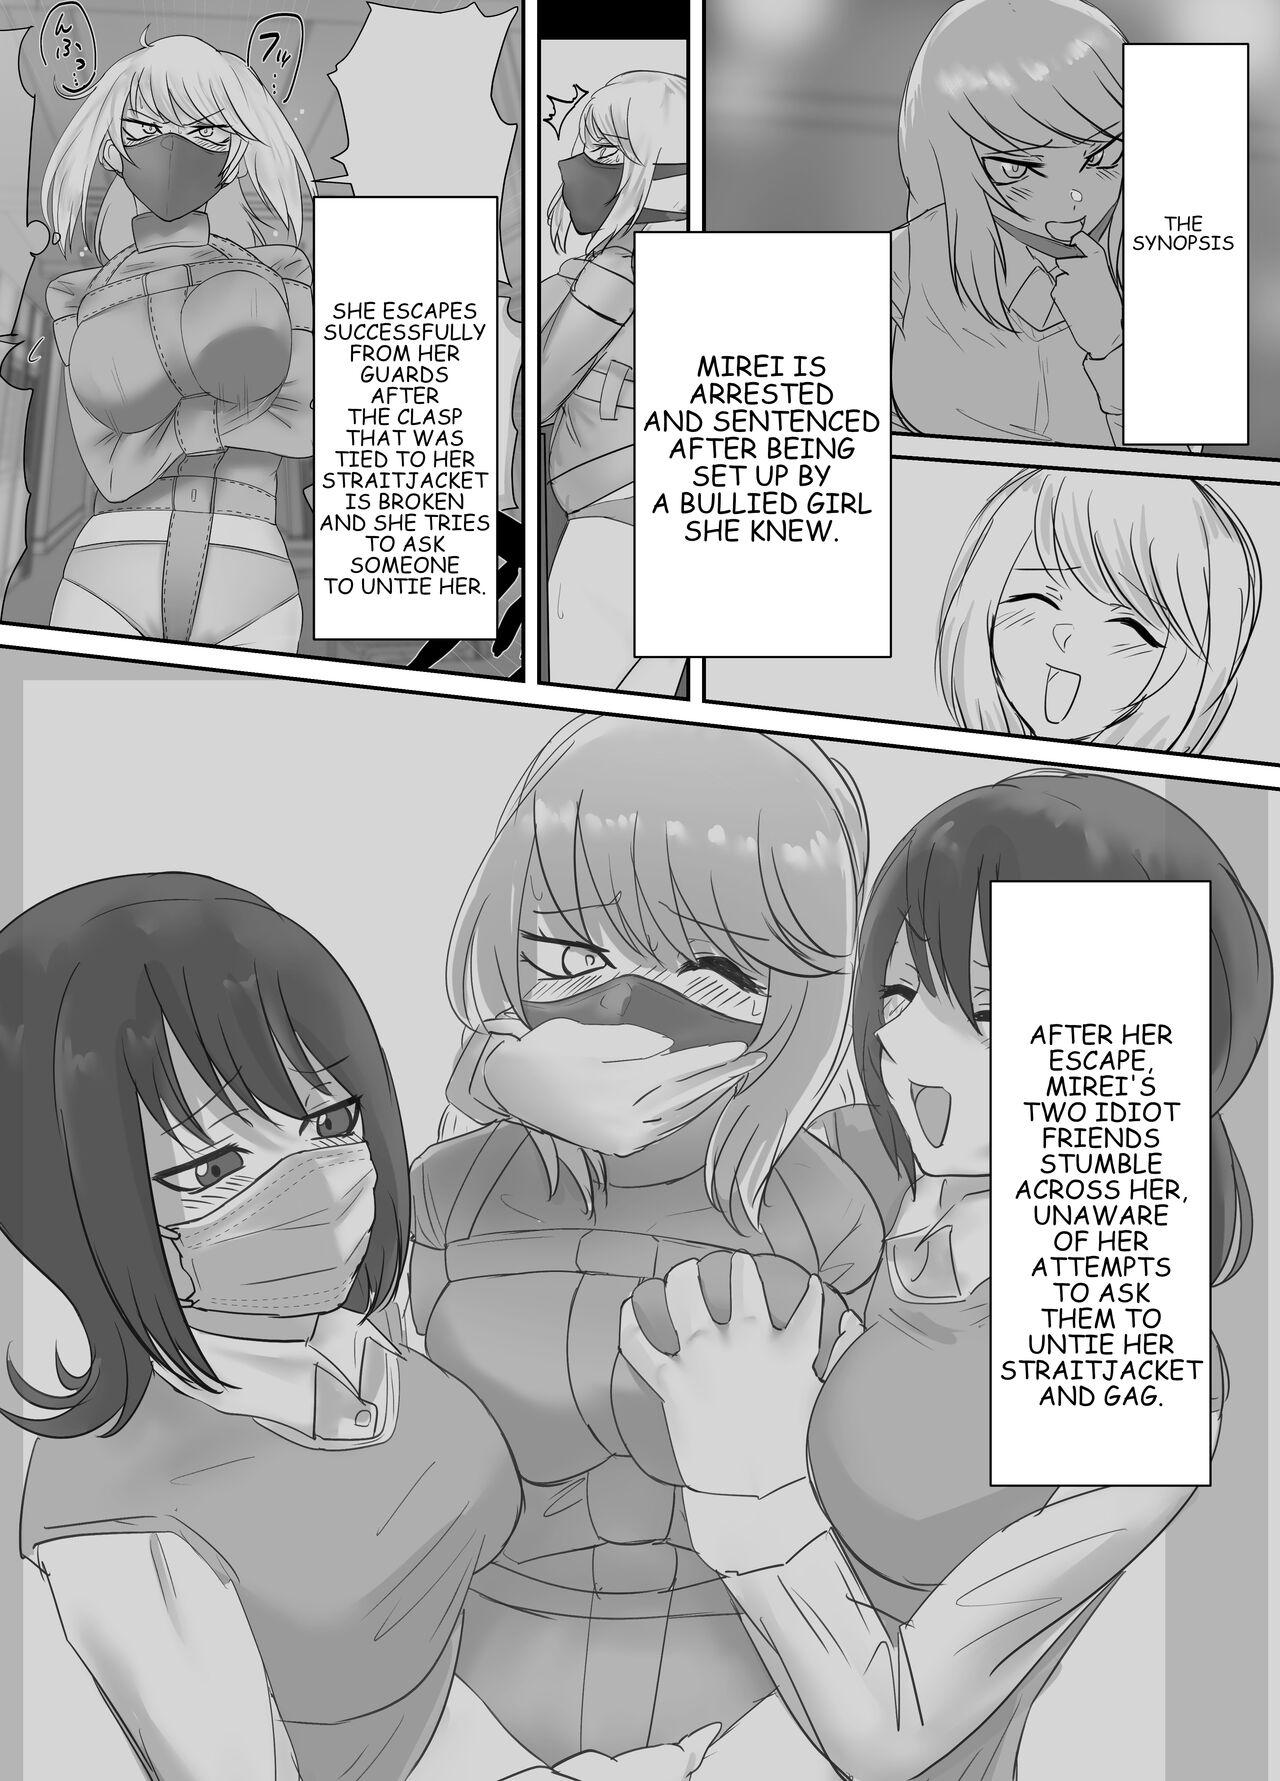 Extreme DELINQUENT GIRL ON THE RUN! 2 - Original Gays - Page 2